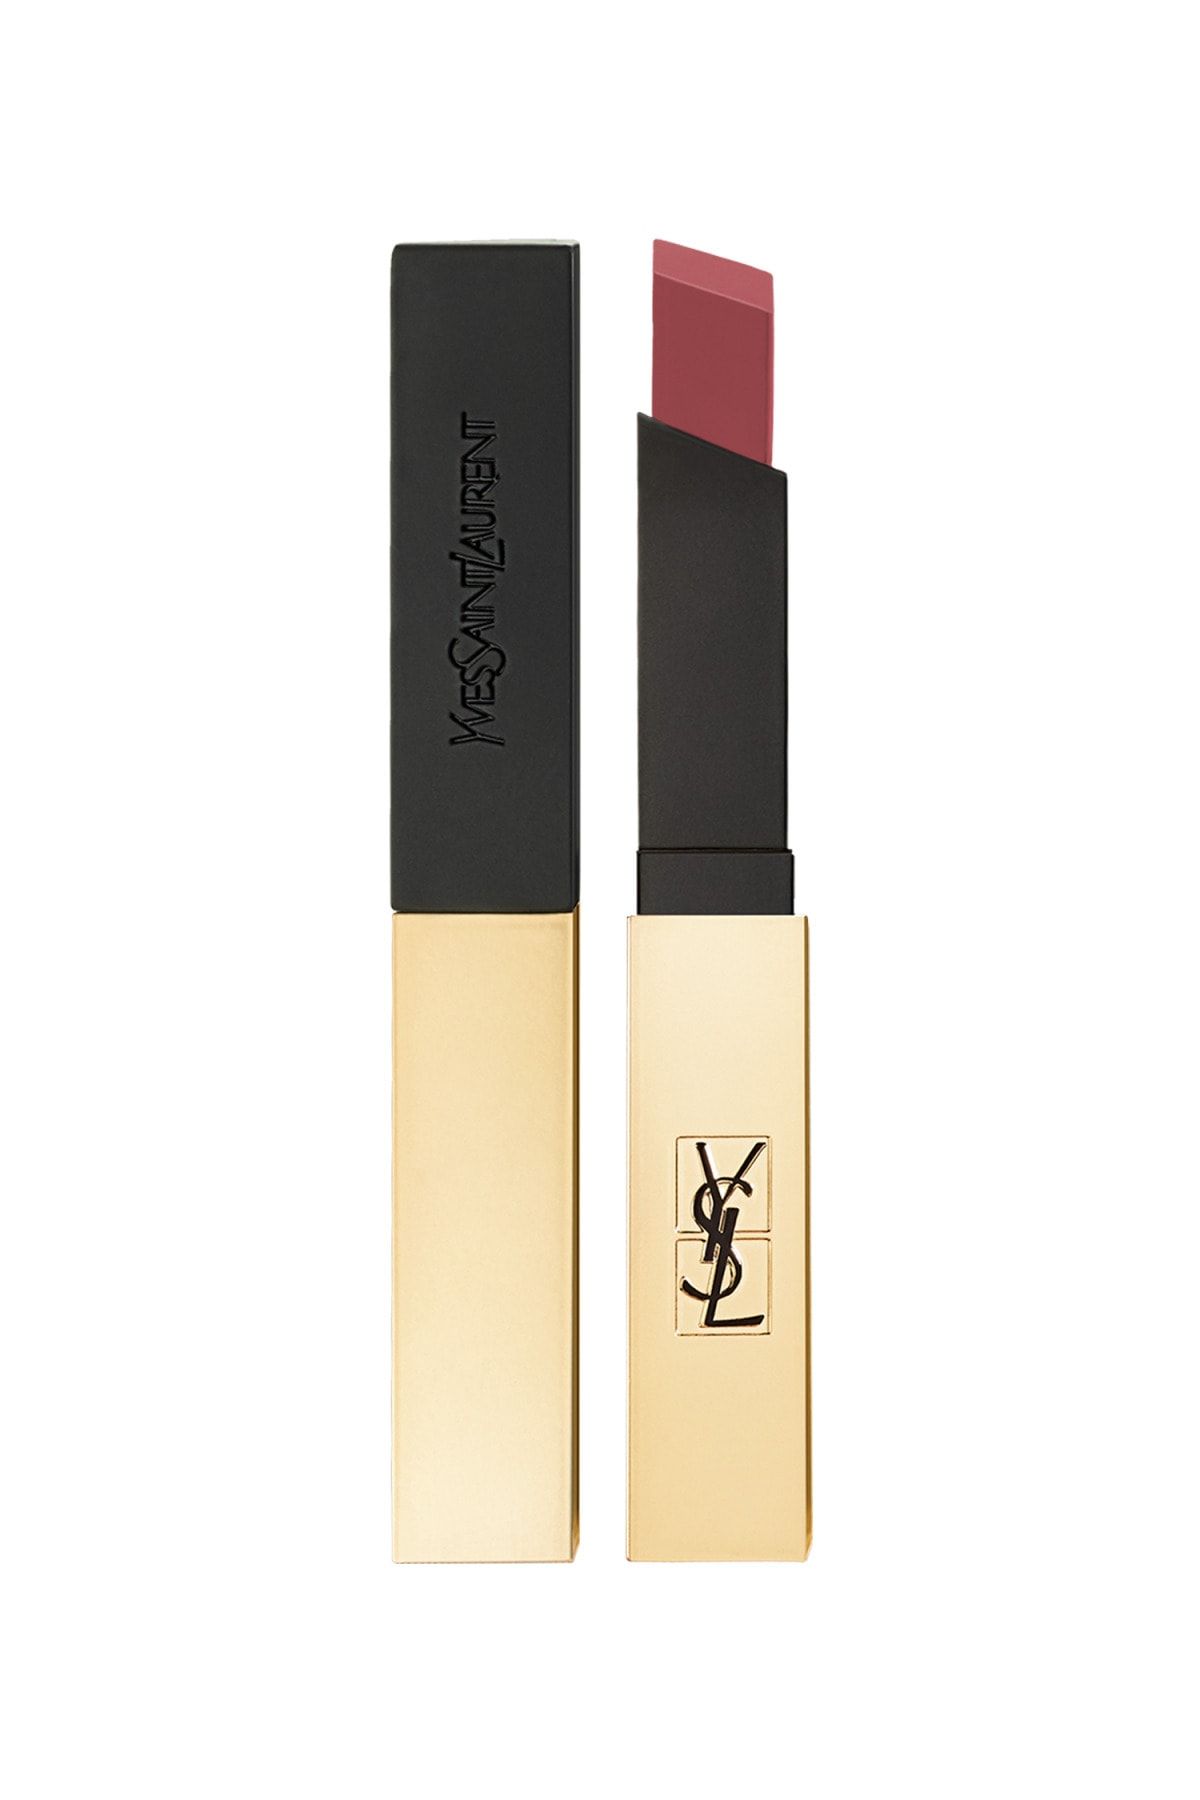 Yves Saint Laurent Rouge Pur Couture The Slim Ruj 30 - Nude Protest 3614272945975